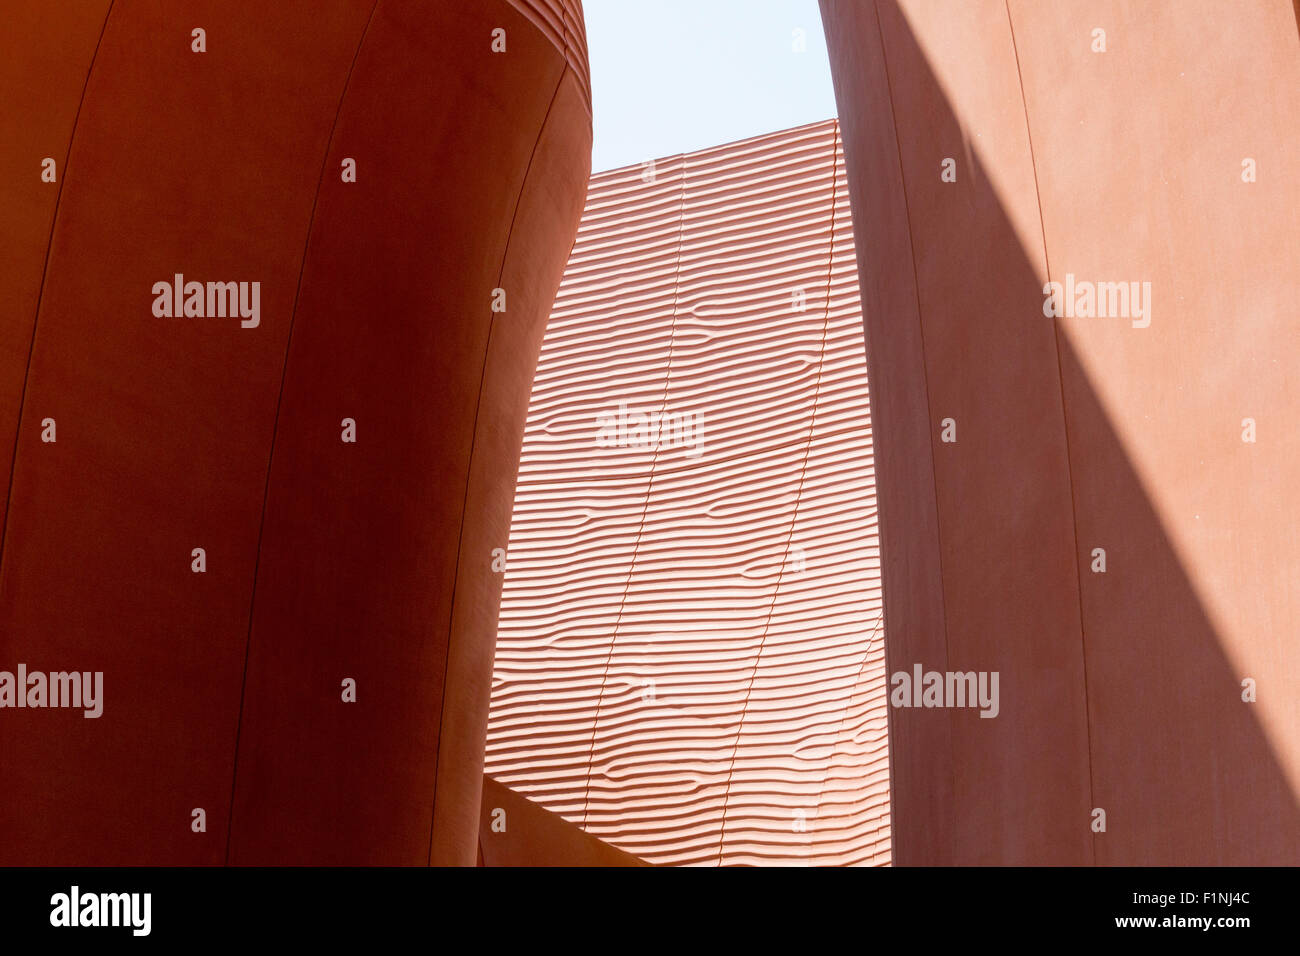 Milan, Italy, 12 August 2015: Detail of the United Arab Erimates pavilion at the exhibition Expo 2015 Italy. Stock Photo